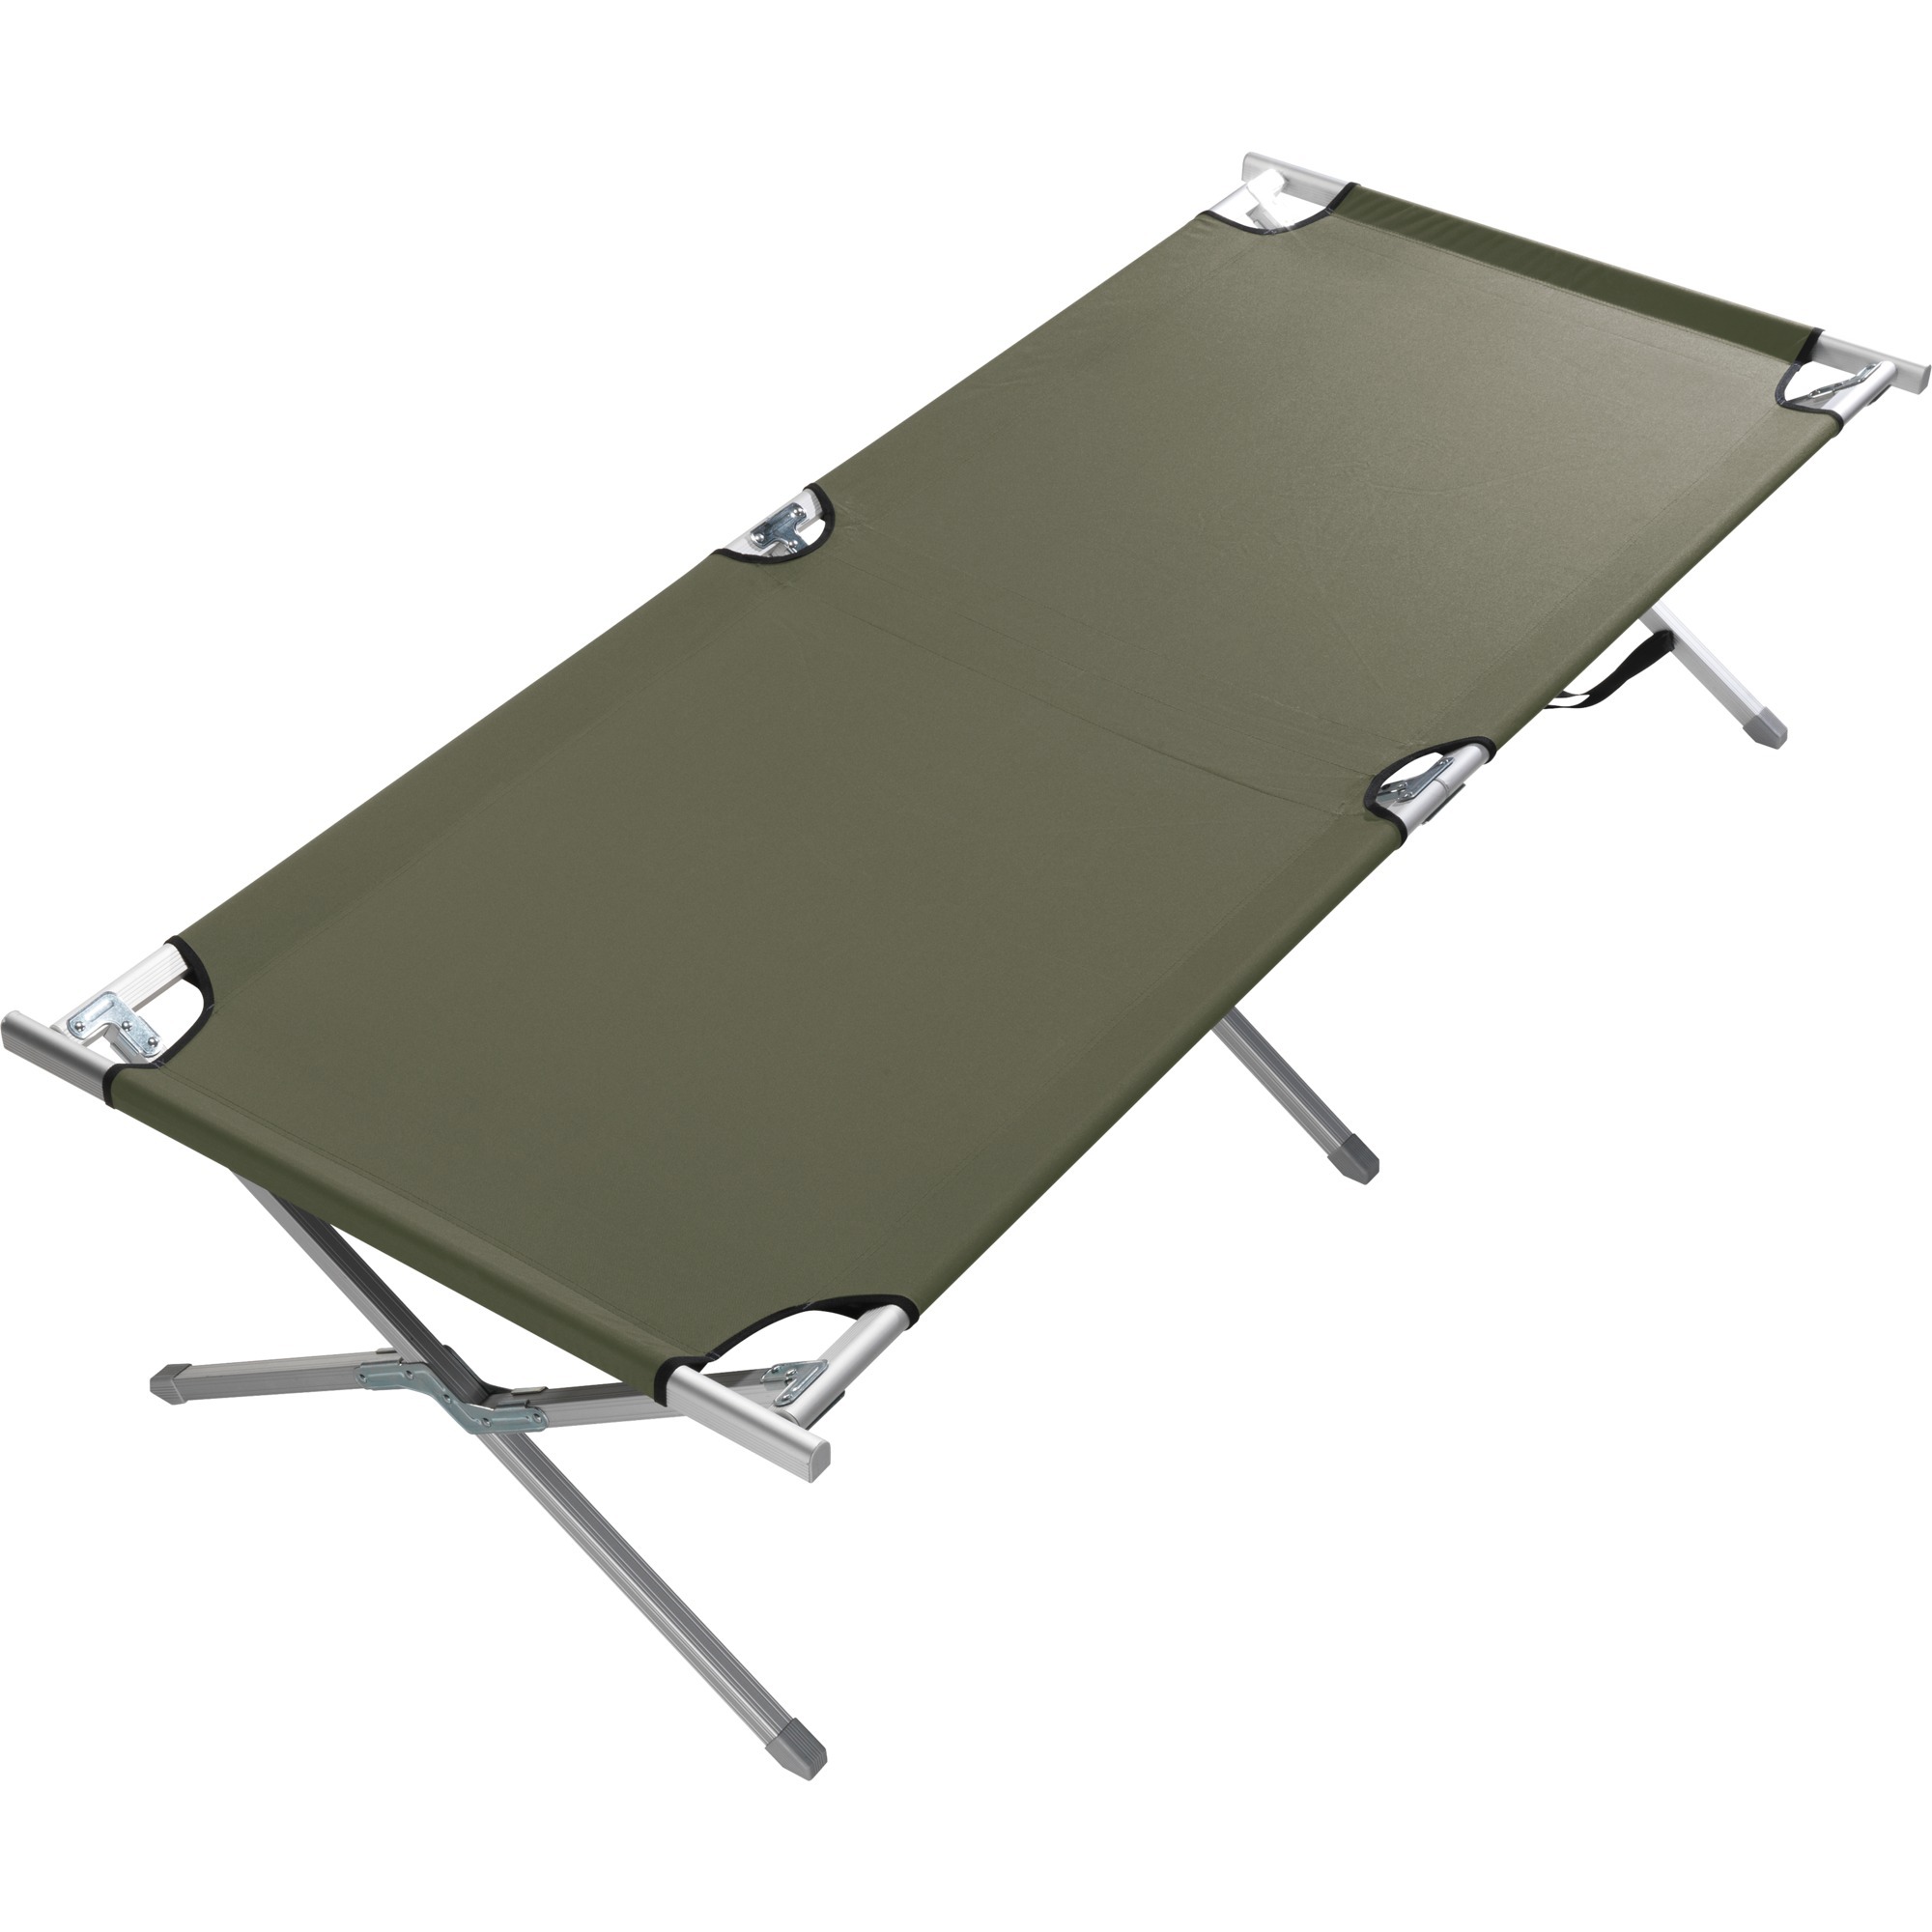 308105, Camping bed